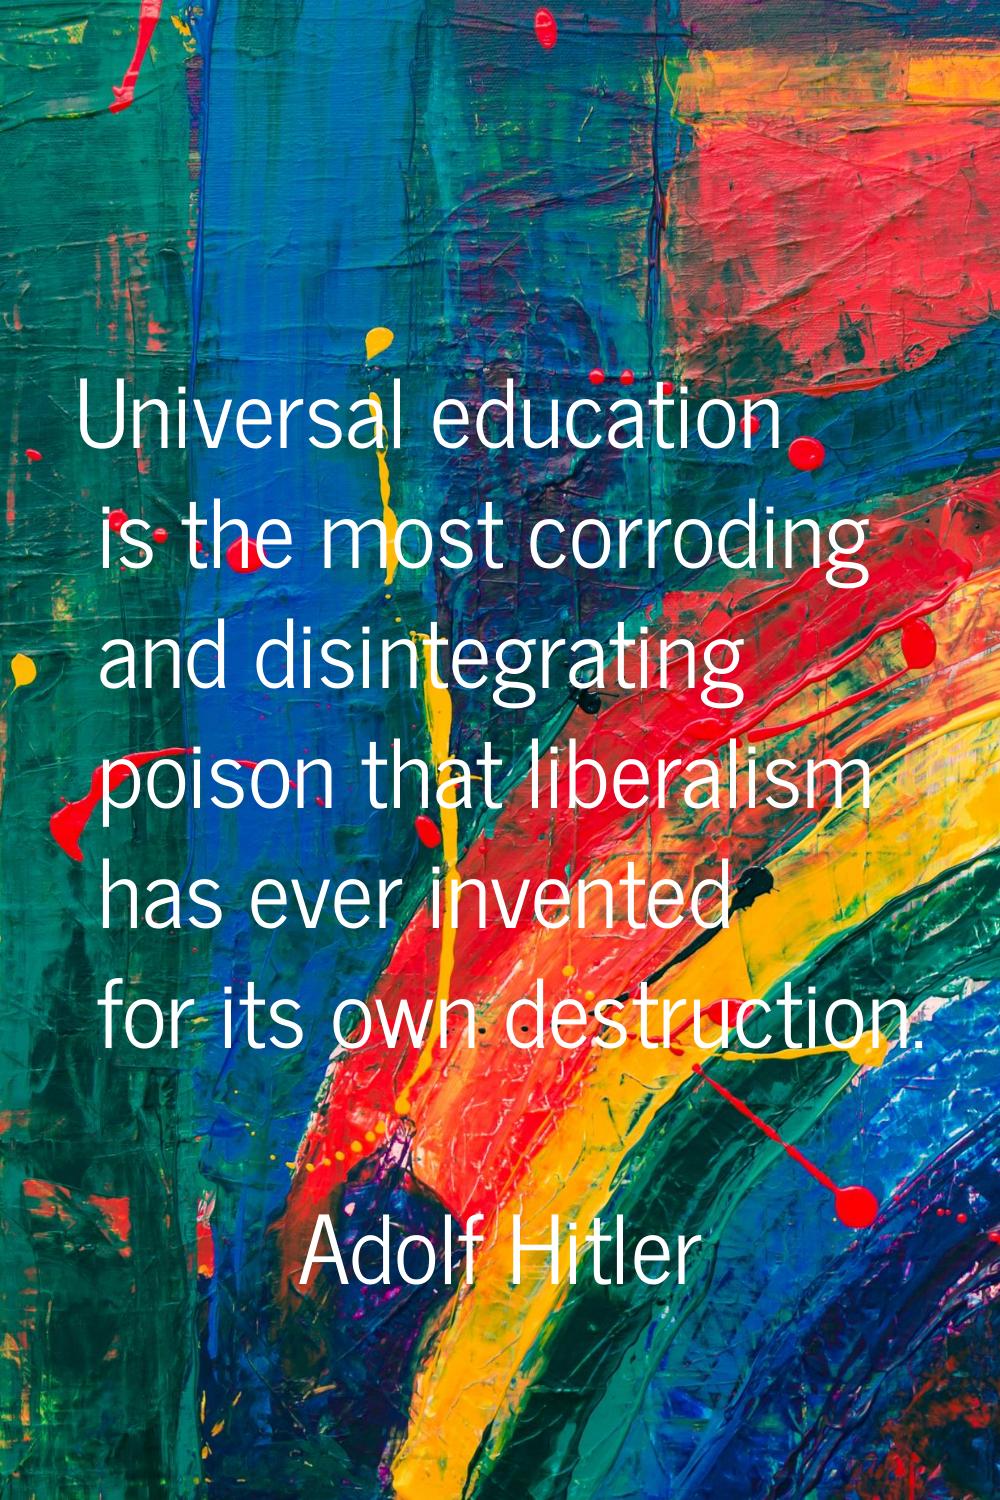 Universal education is the most corroding and disintegrating poison that liberalism has ever invent